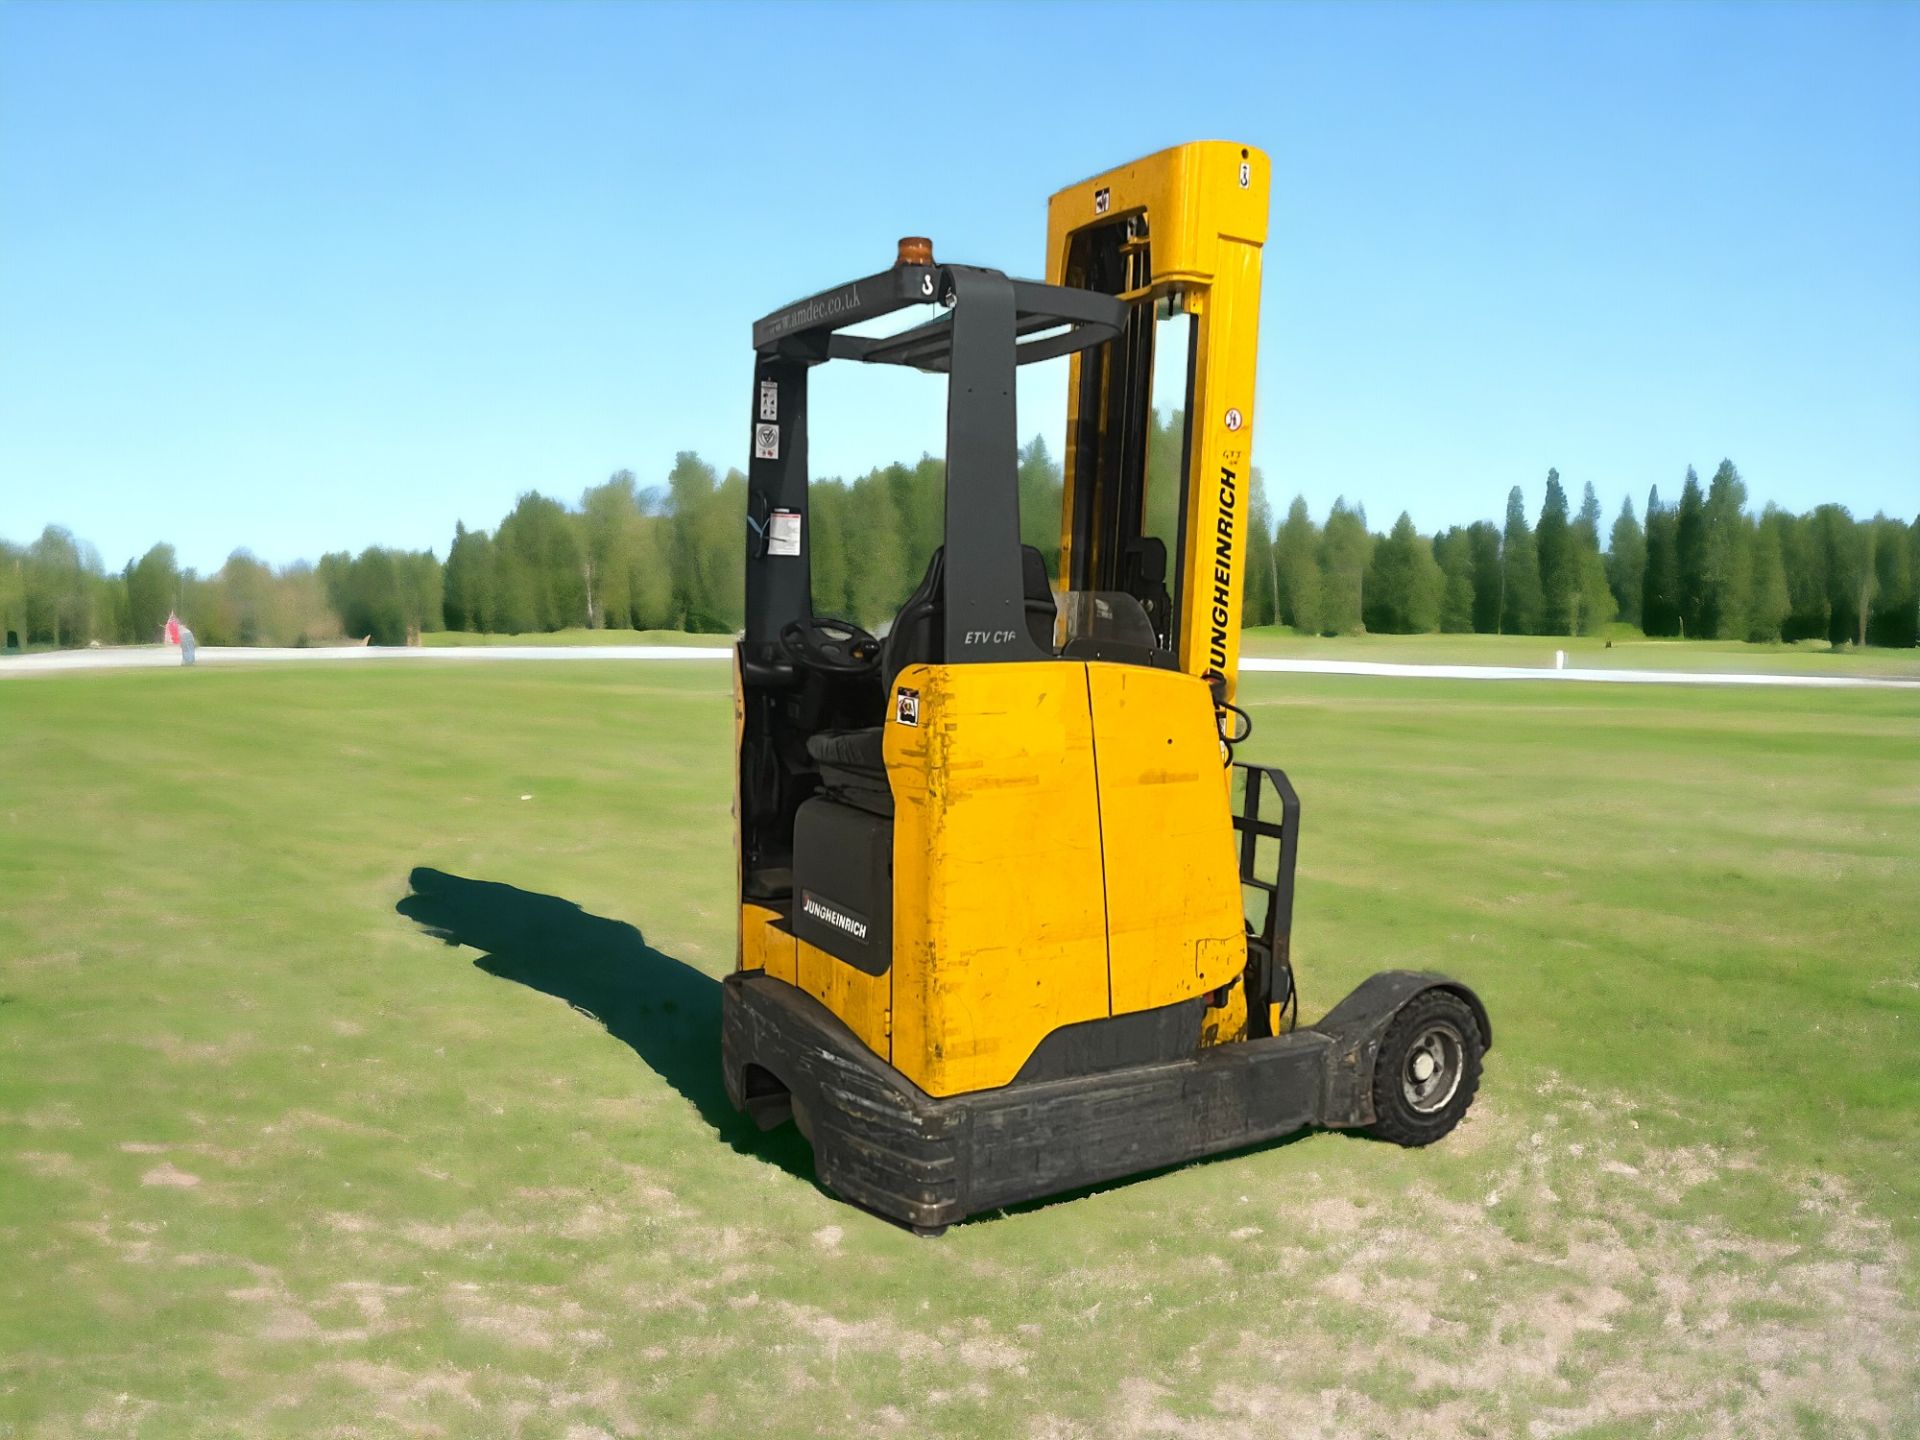 JUNGHEINRICH REACH TRUCK ETVC 16: POWERFUL ELECTRIC WORKHORSE WITH LOW HOURS **(INCLUDES CHARGER)** - Image 2 of 6